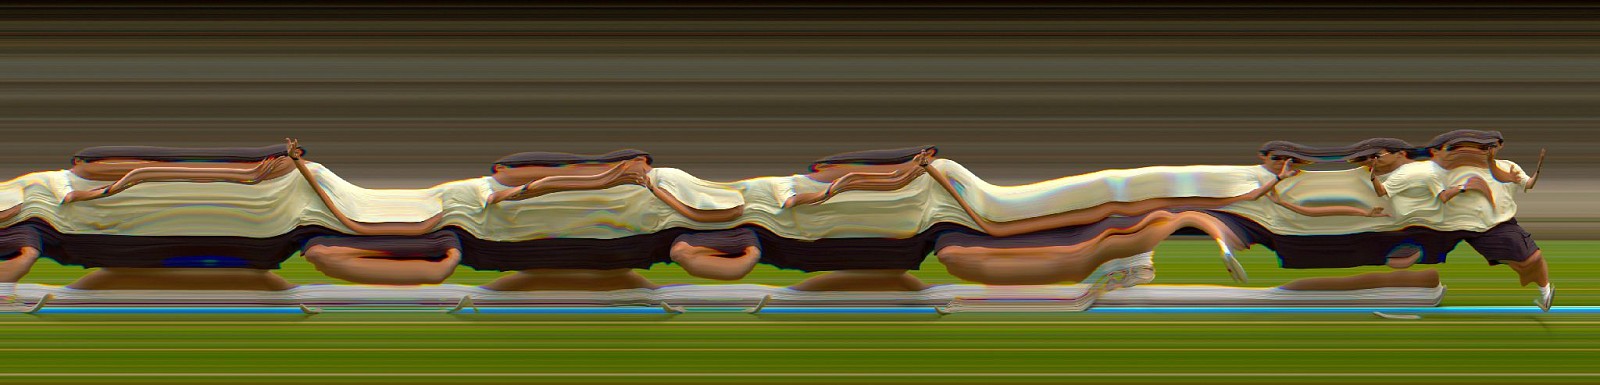 Jay Mark Johnson, TAICHI MOTION STUDY 161, 2005 Los Angeles CA
archival pigment on paper, mounted on aluminum, 40 x 166 in. (101.6 x 421.6 cm)